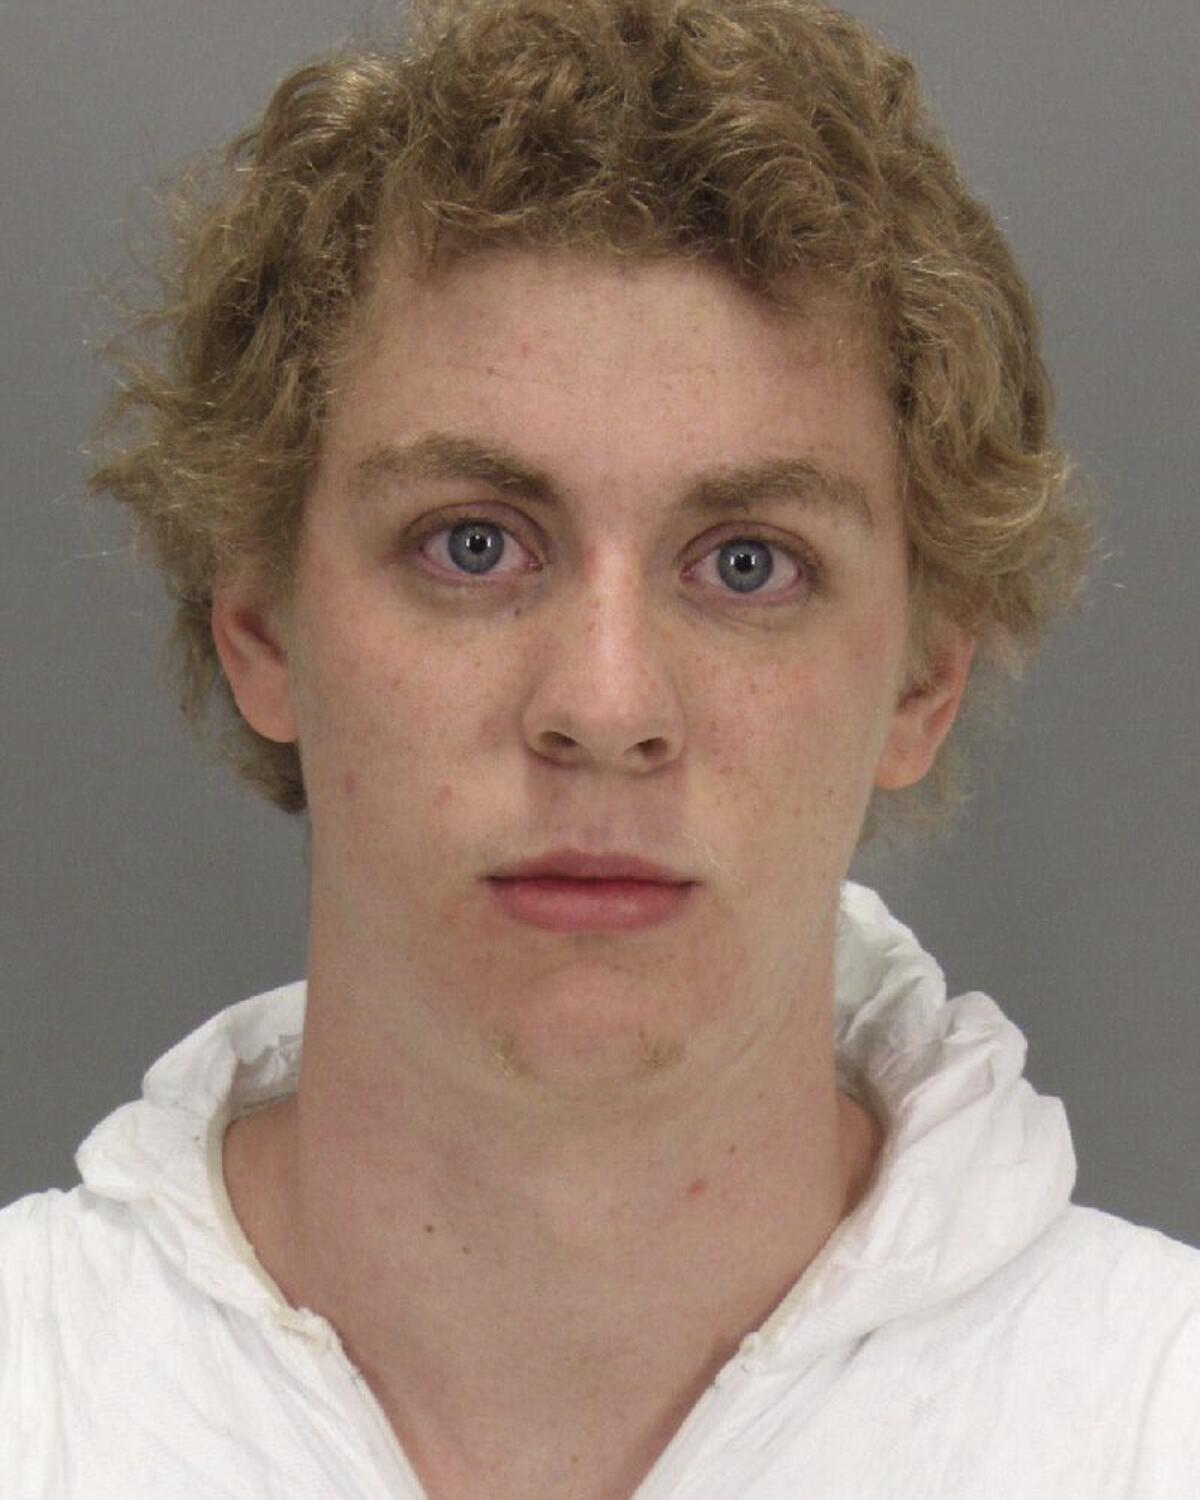 Brock Turner, shown in a January 2015 booking photo released by the Santa Clara County Sheriff's Office. (Associated Press)